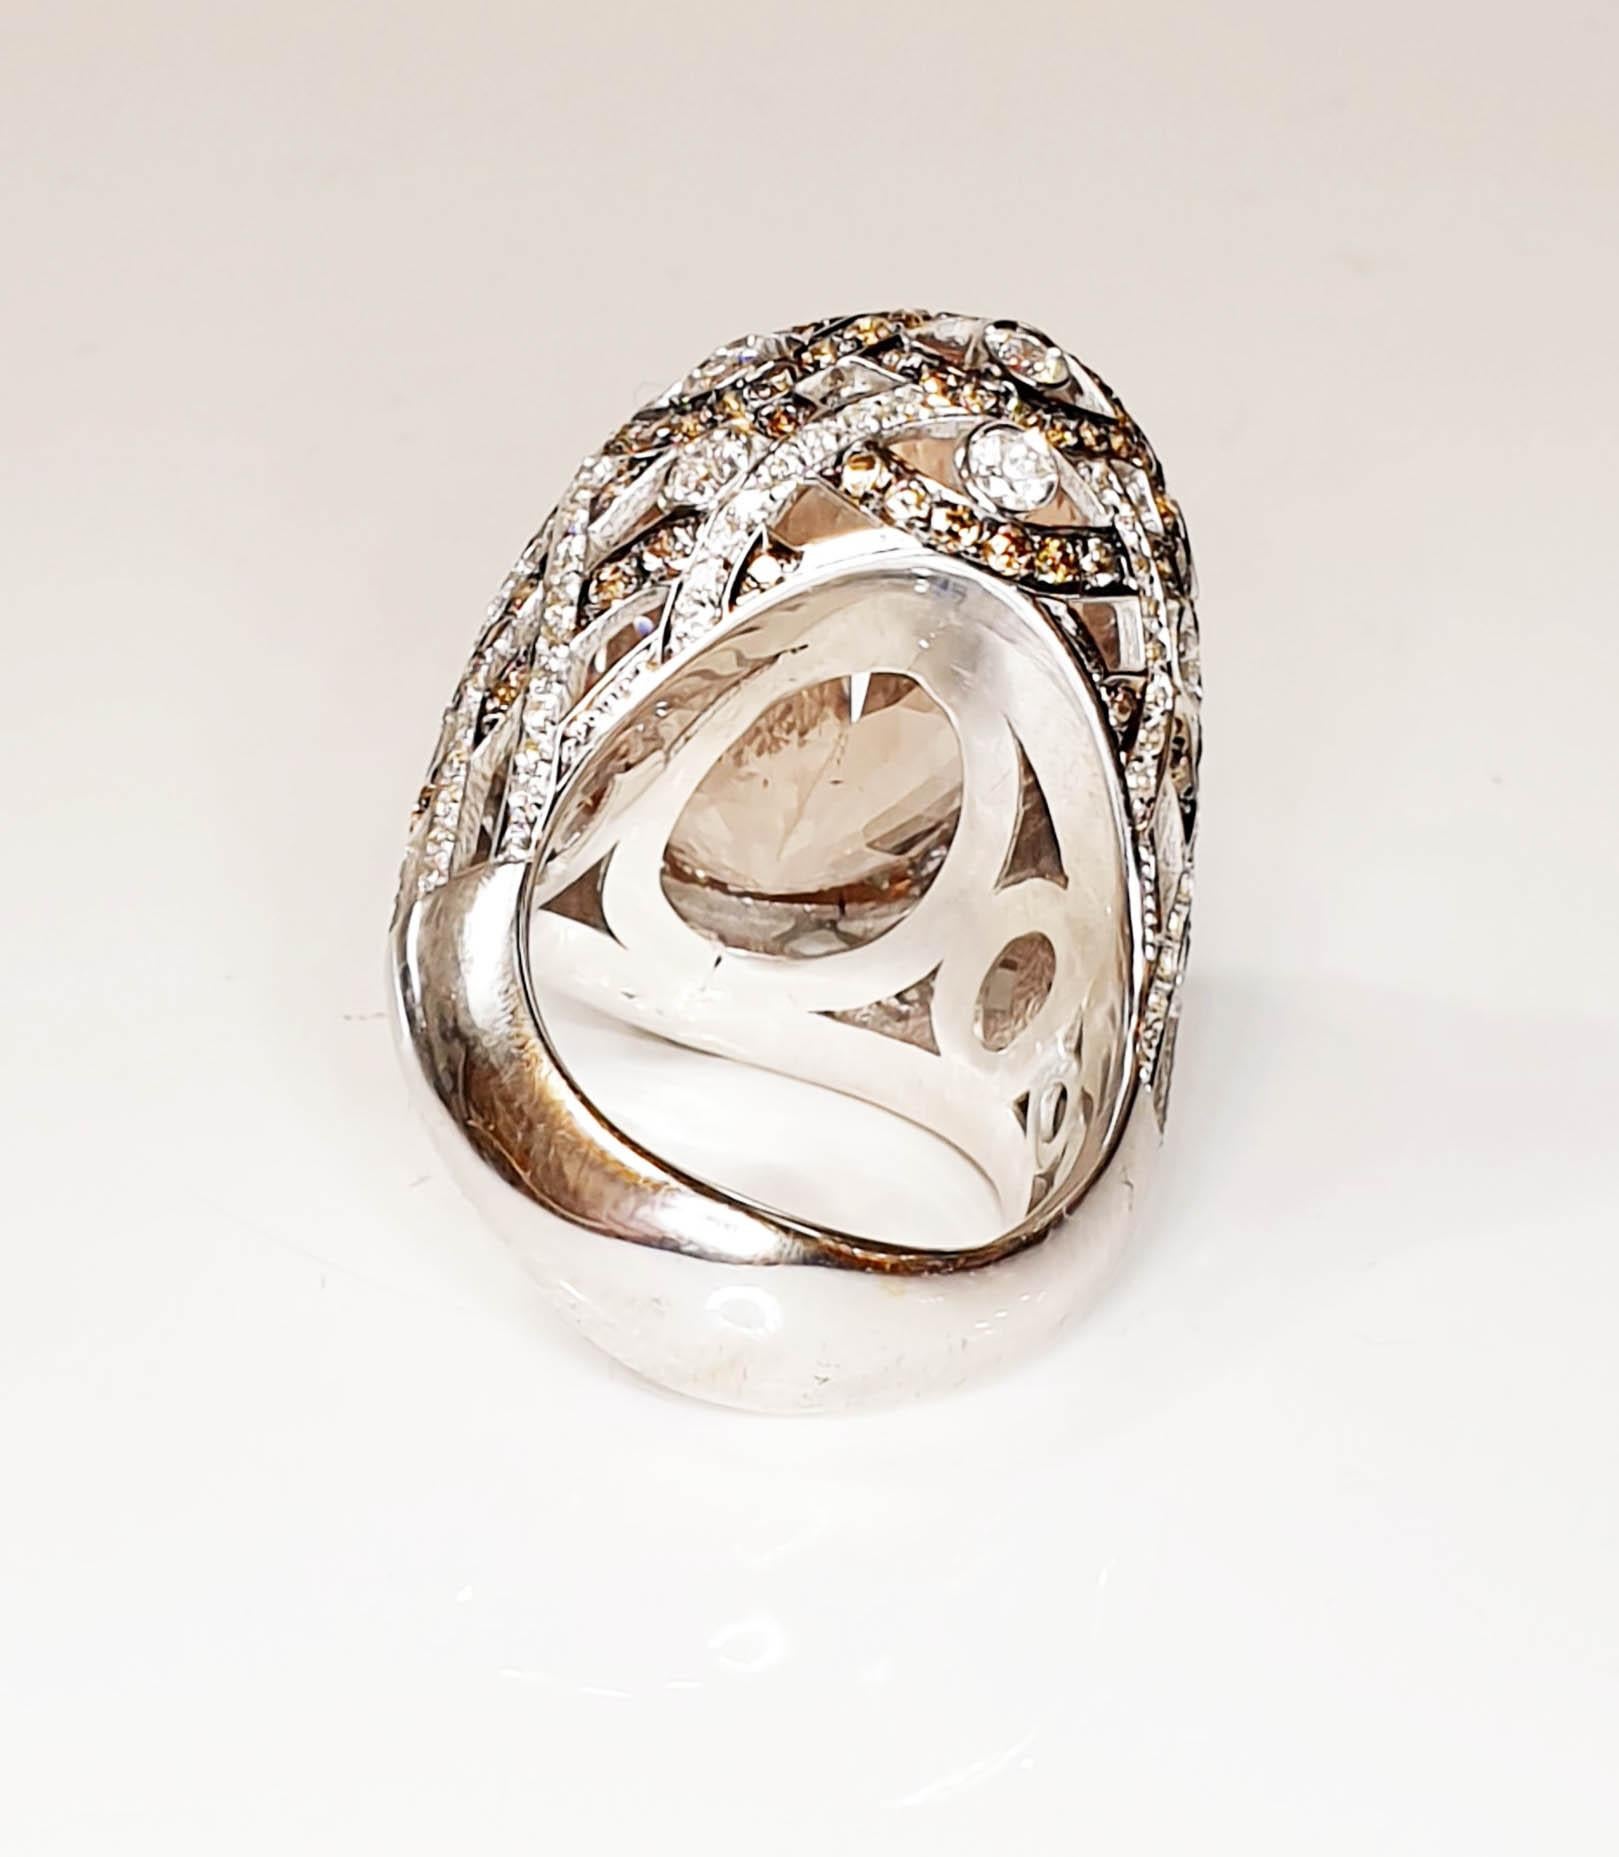 Multifaceted 25ct Morganite  with Brown and white  Diamonds in 18k white gold ring
Irama Pradera is a vdynamic and outgoing designer from Spain that searches always for the best gems and combines classic with contemporary mounting and